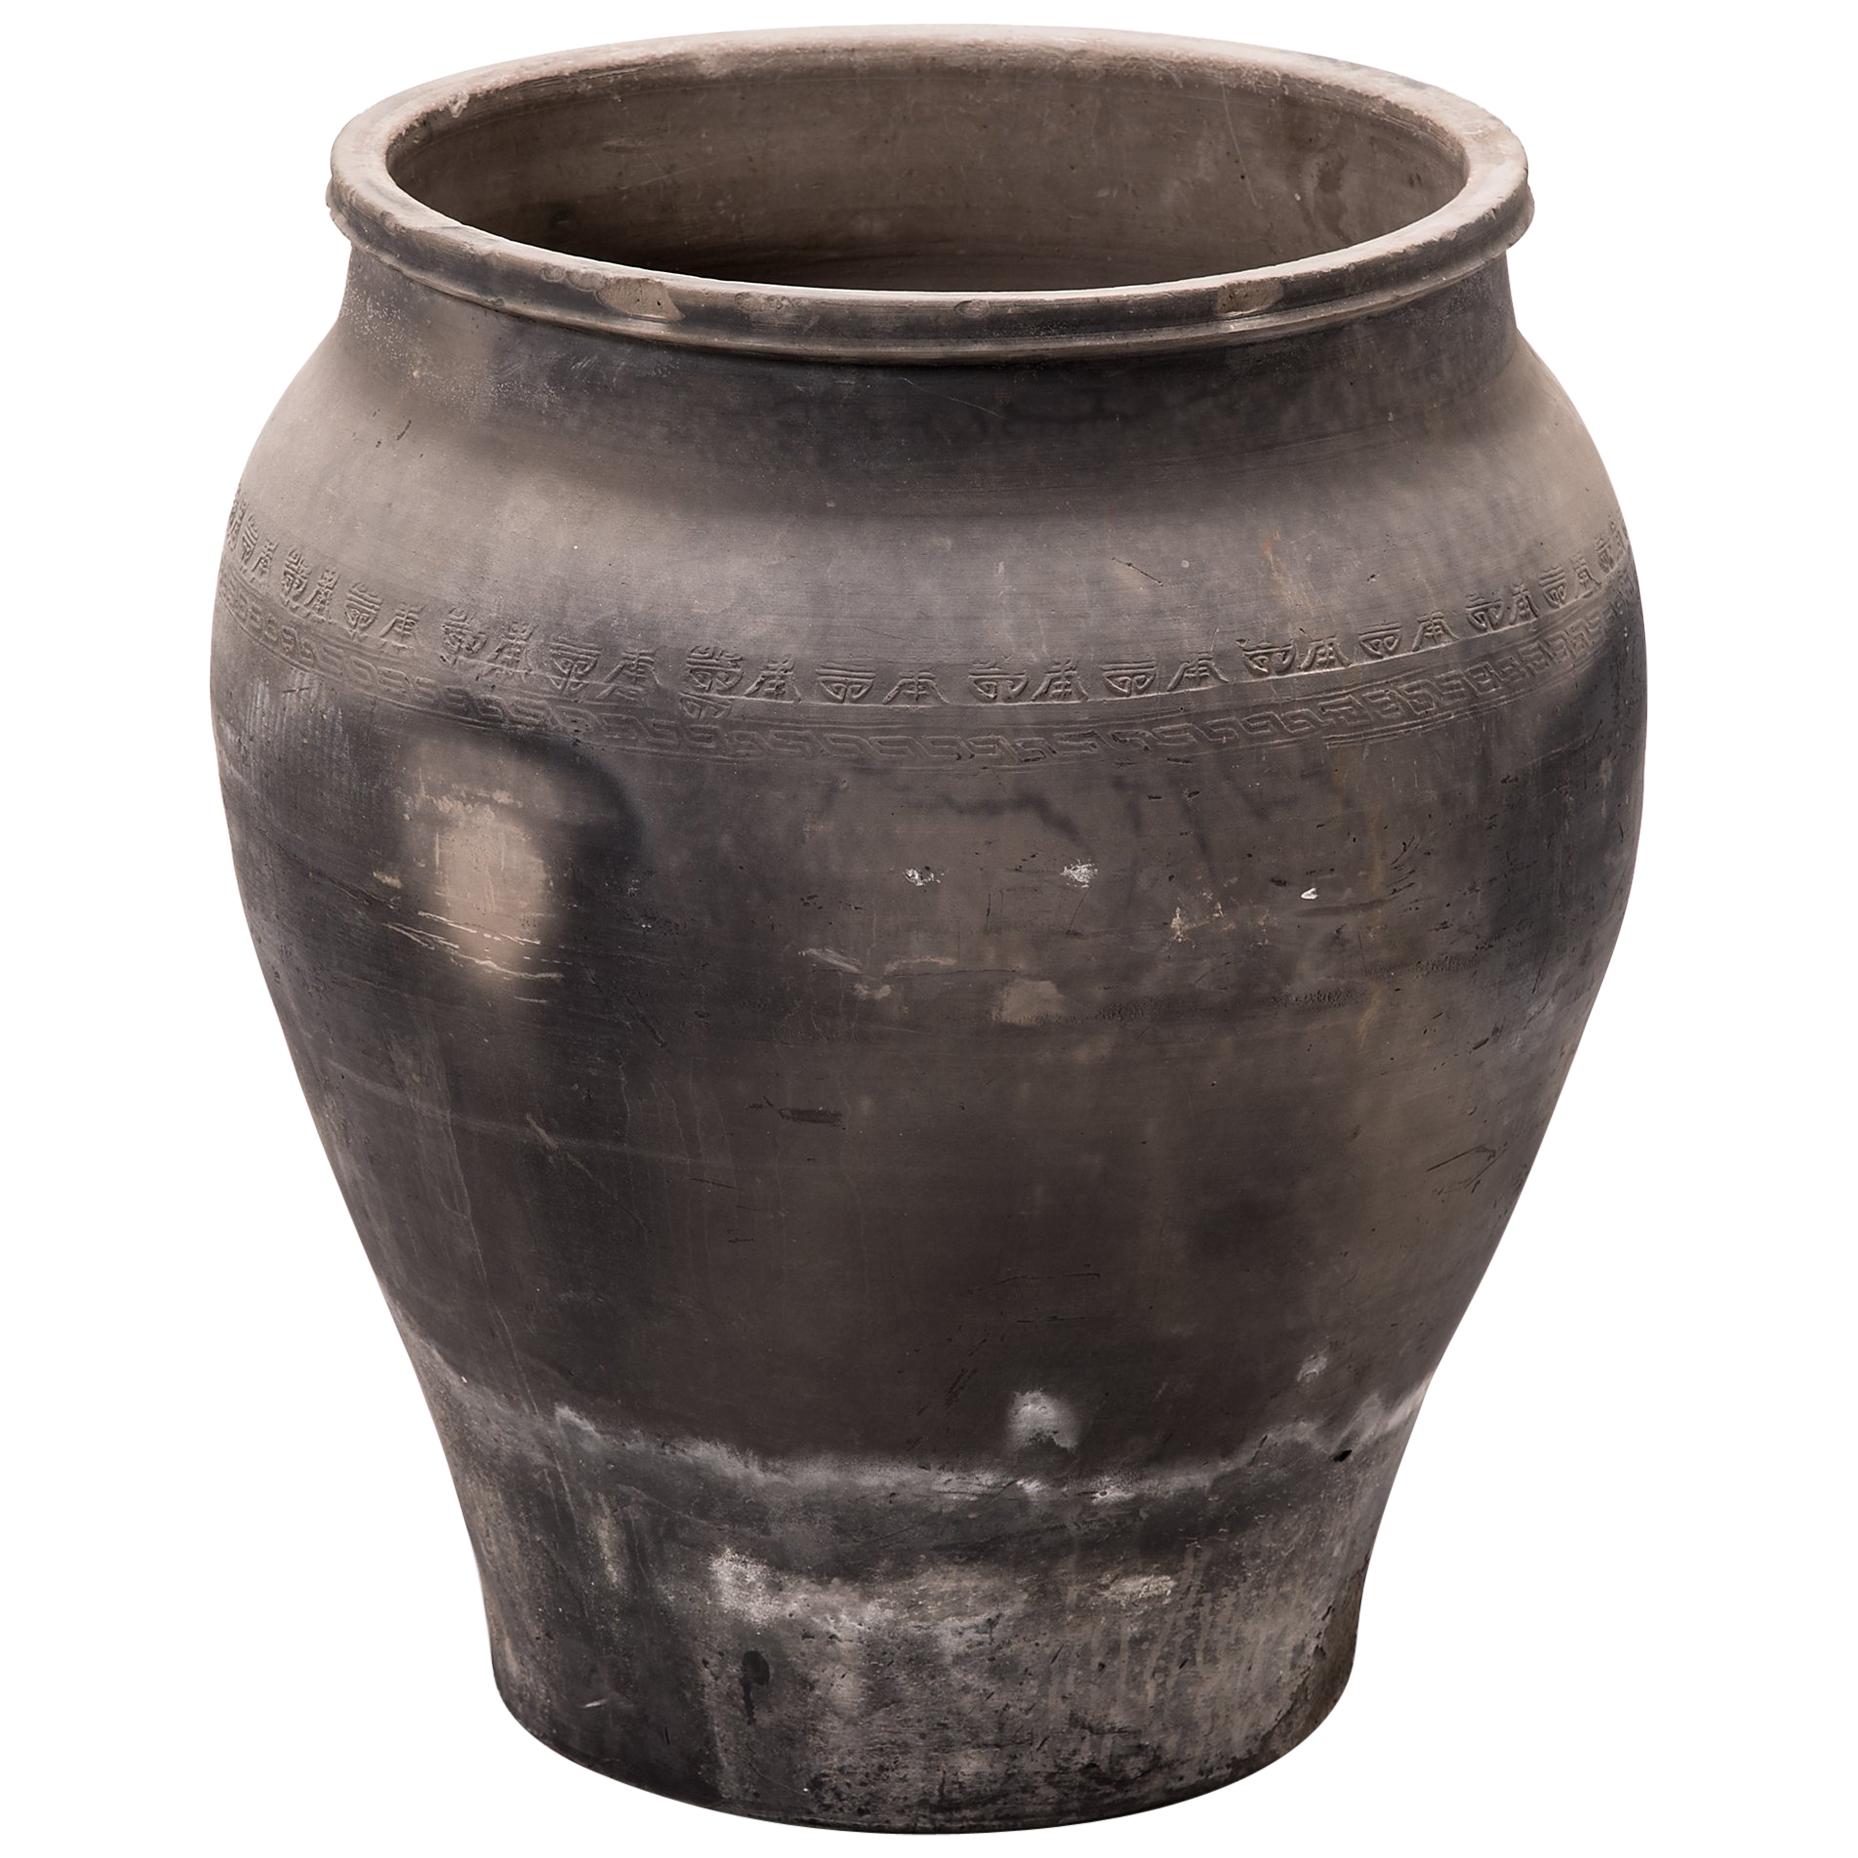 Early 20th Century Chinese Tapered Terracotta Storage Jar